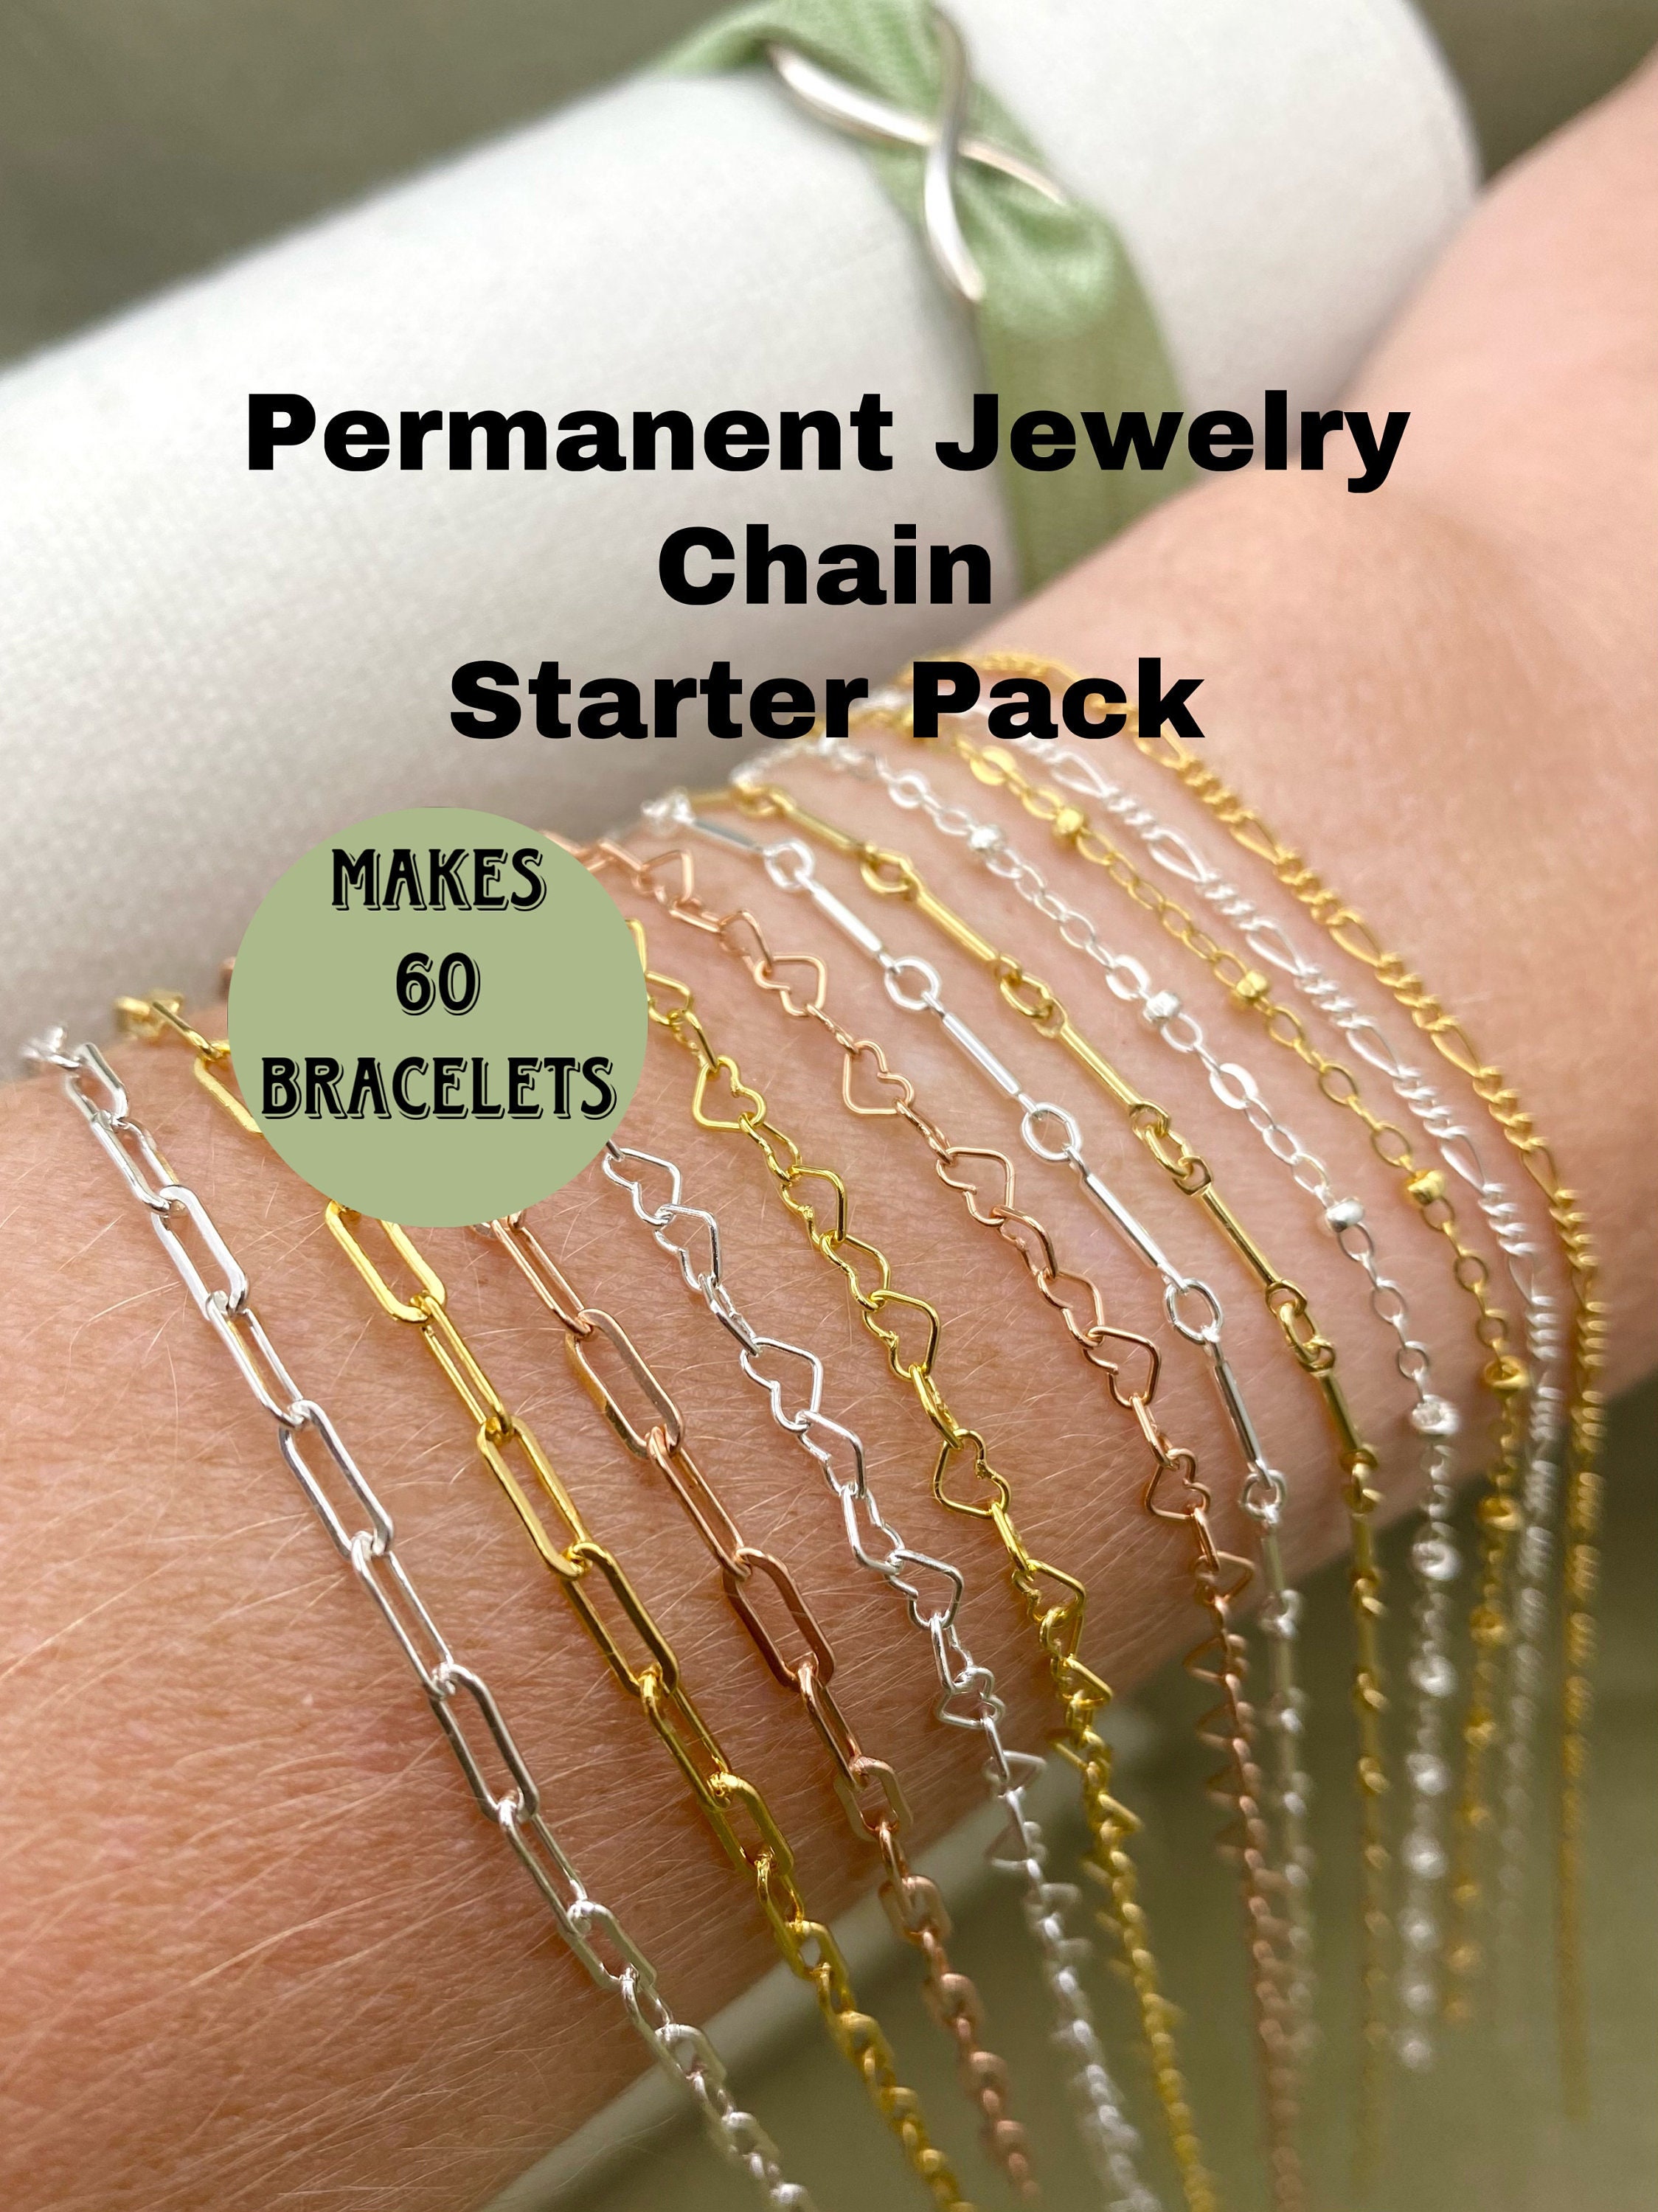 Permanent Jewelry Chain Starter Pack the CLASSIC Kit 12 Chains for Welding  Sterling Silver, 14kt Gold Filled, 14kt Rose Gold Filled -  Israel